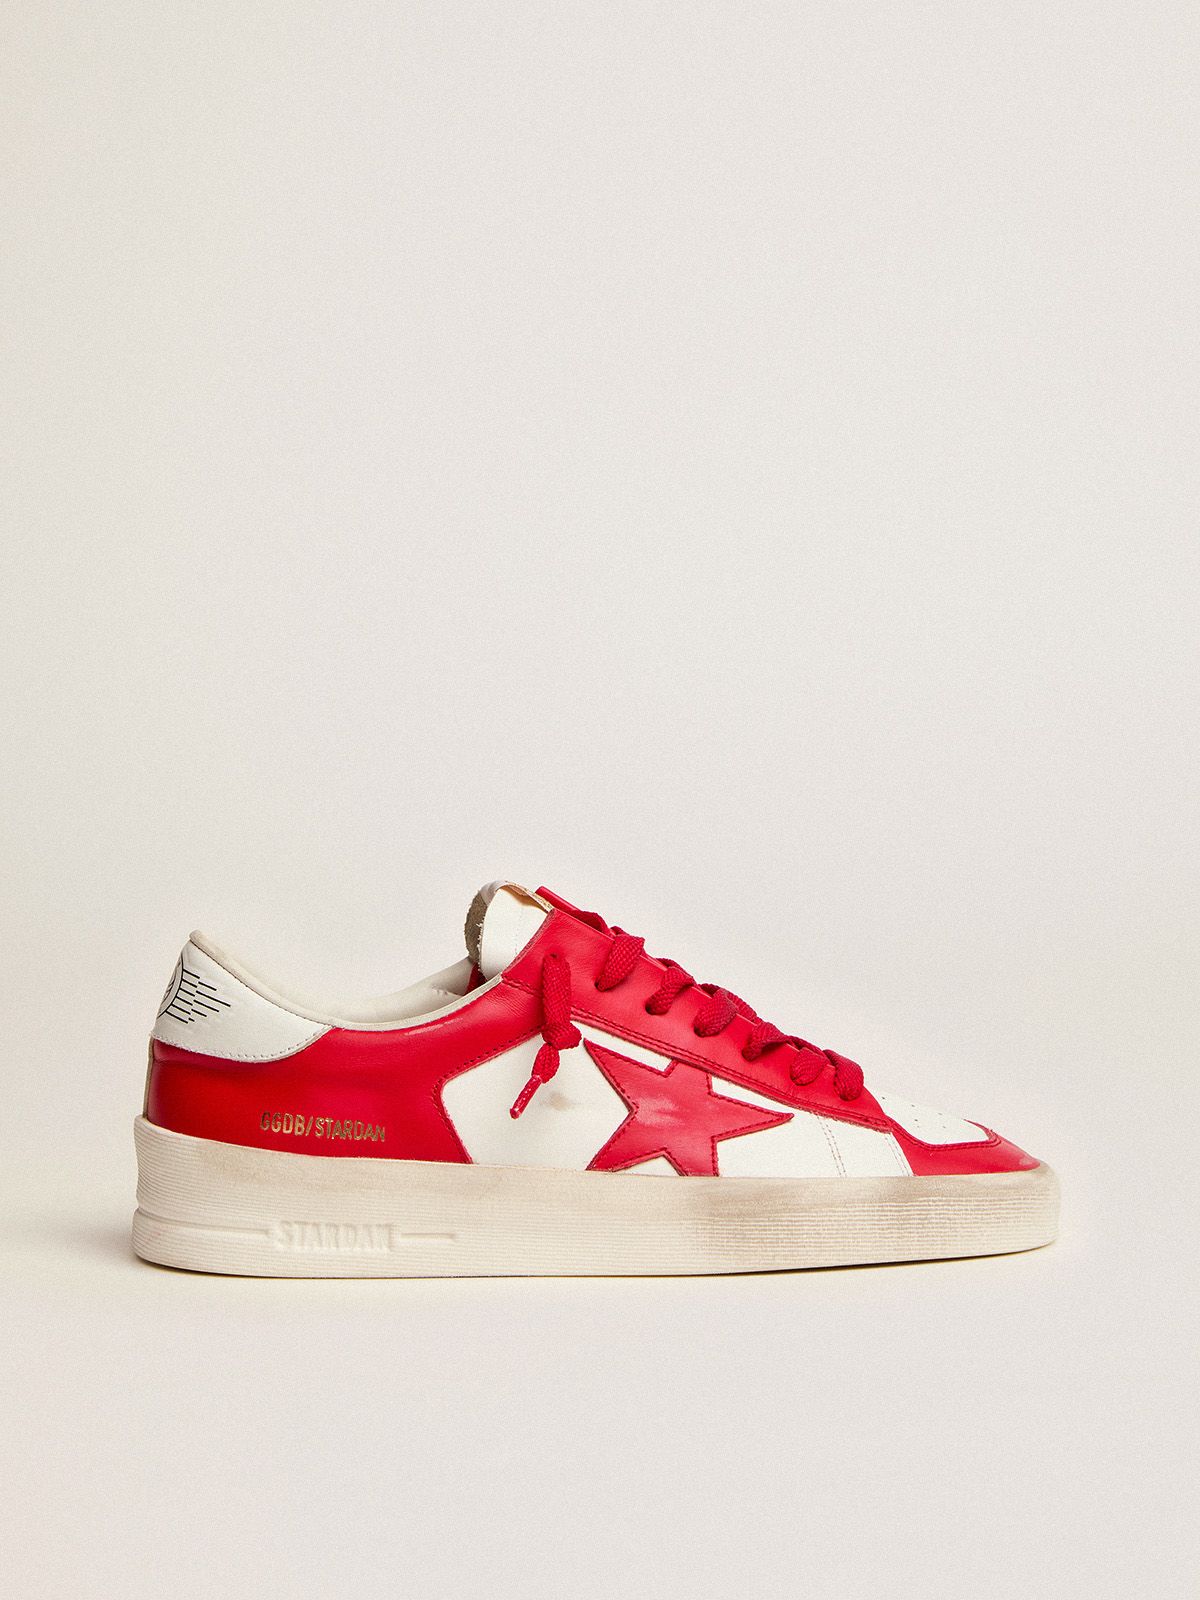 Golden Goose Saldi Uomo Stardan sneakers in white and red leather